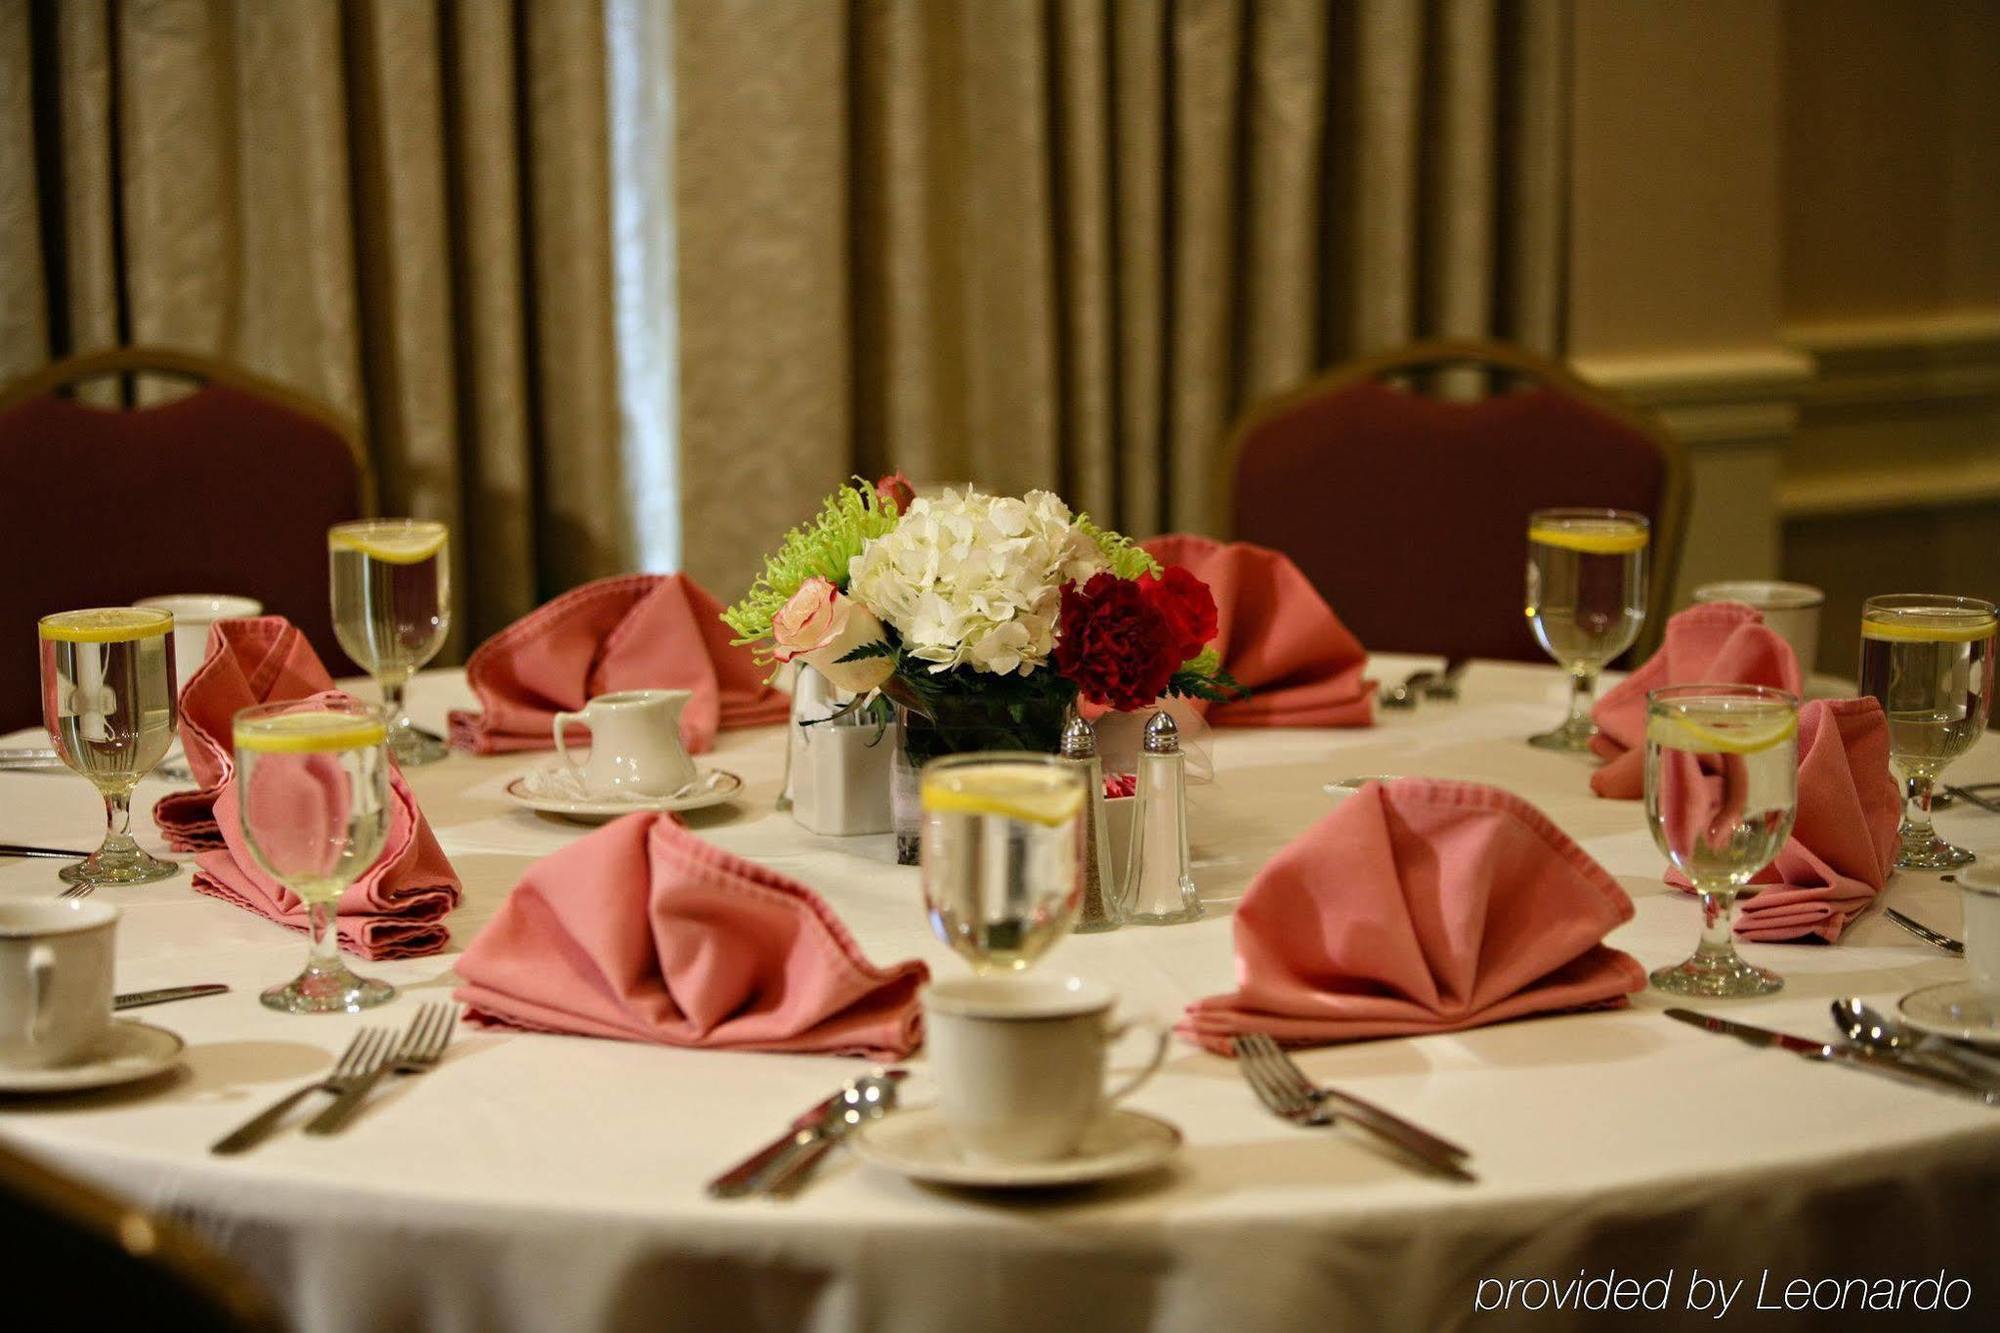 Radisson Hotel And Suites Chelmsford-Lowell Restaurace fotografie